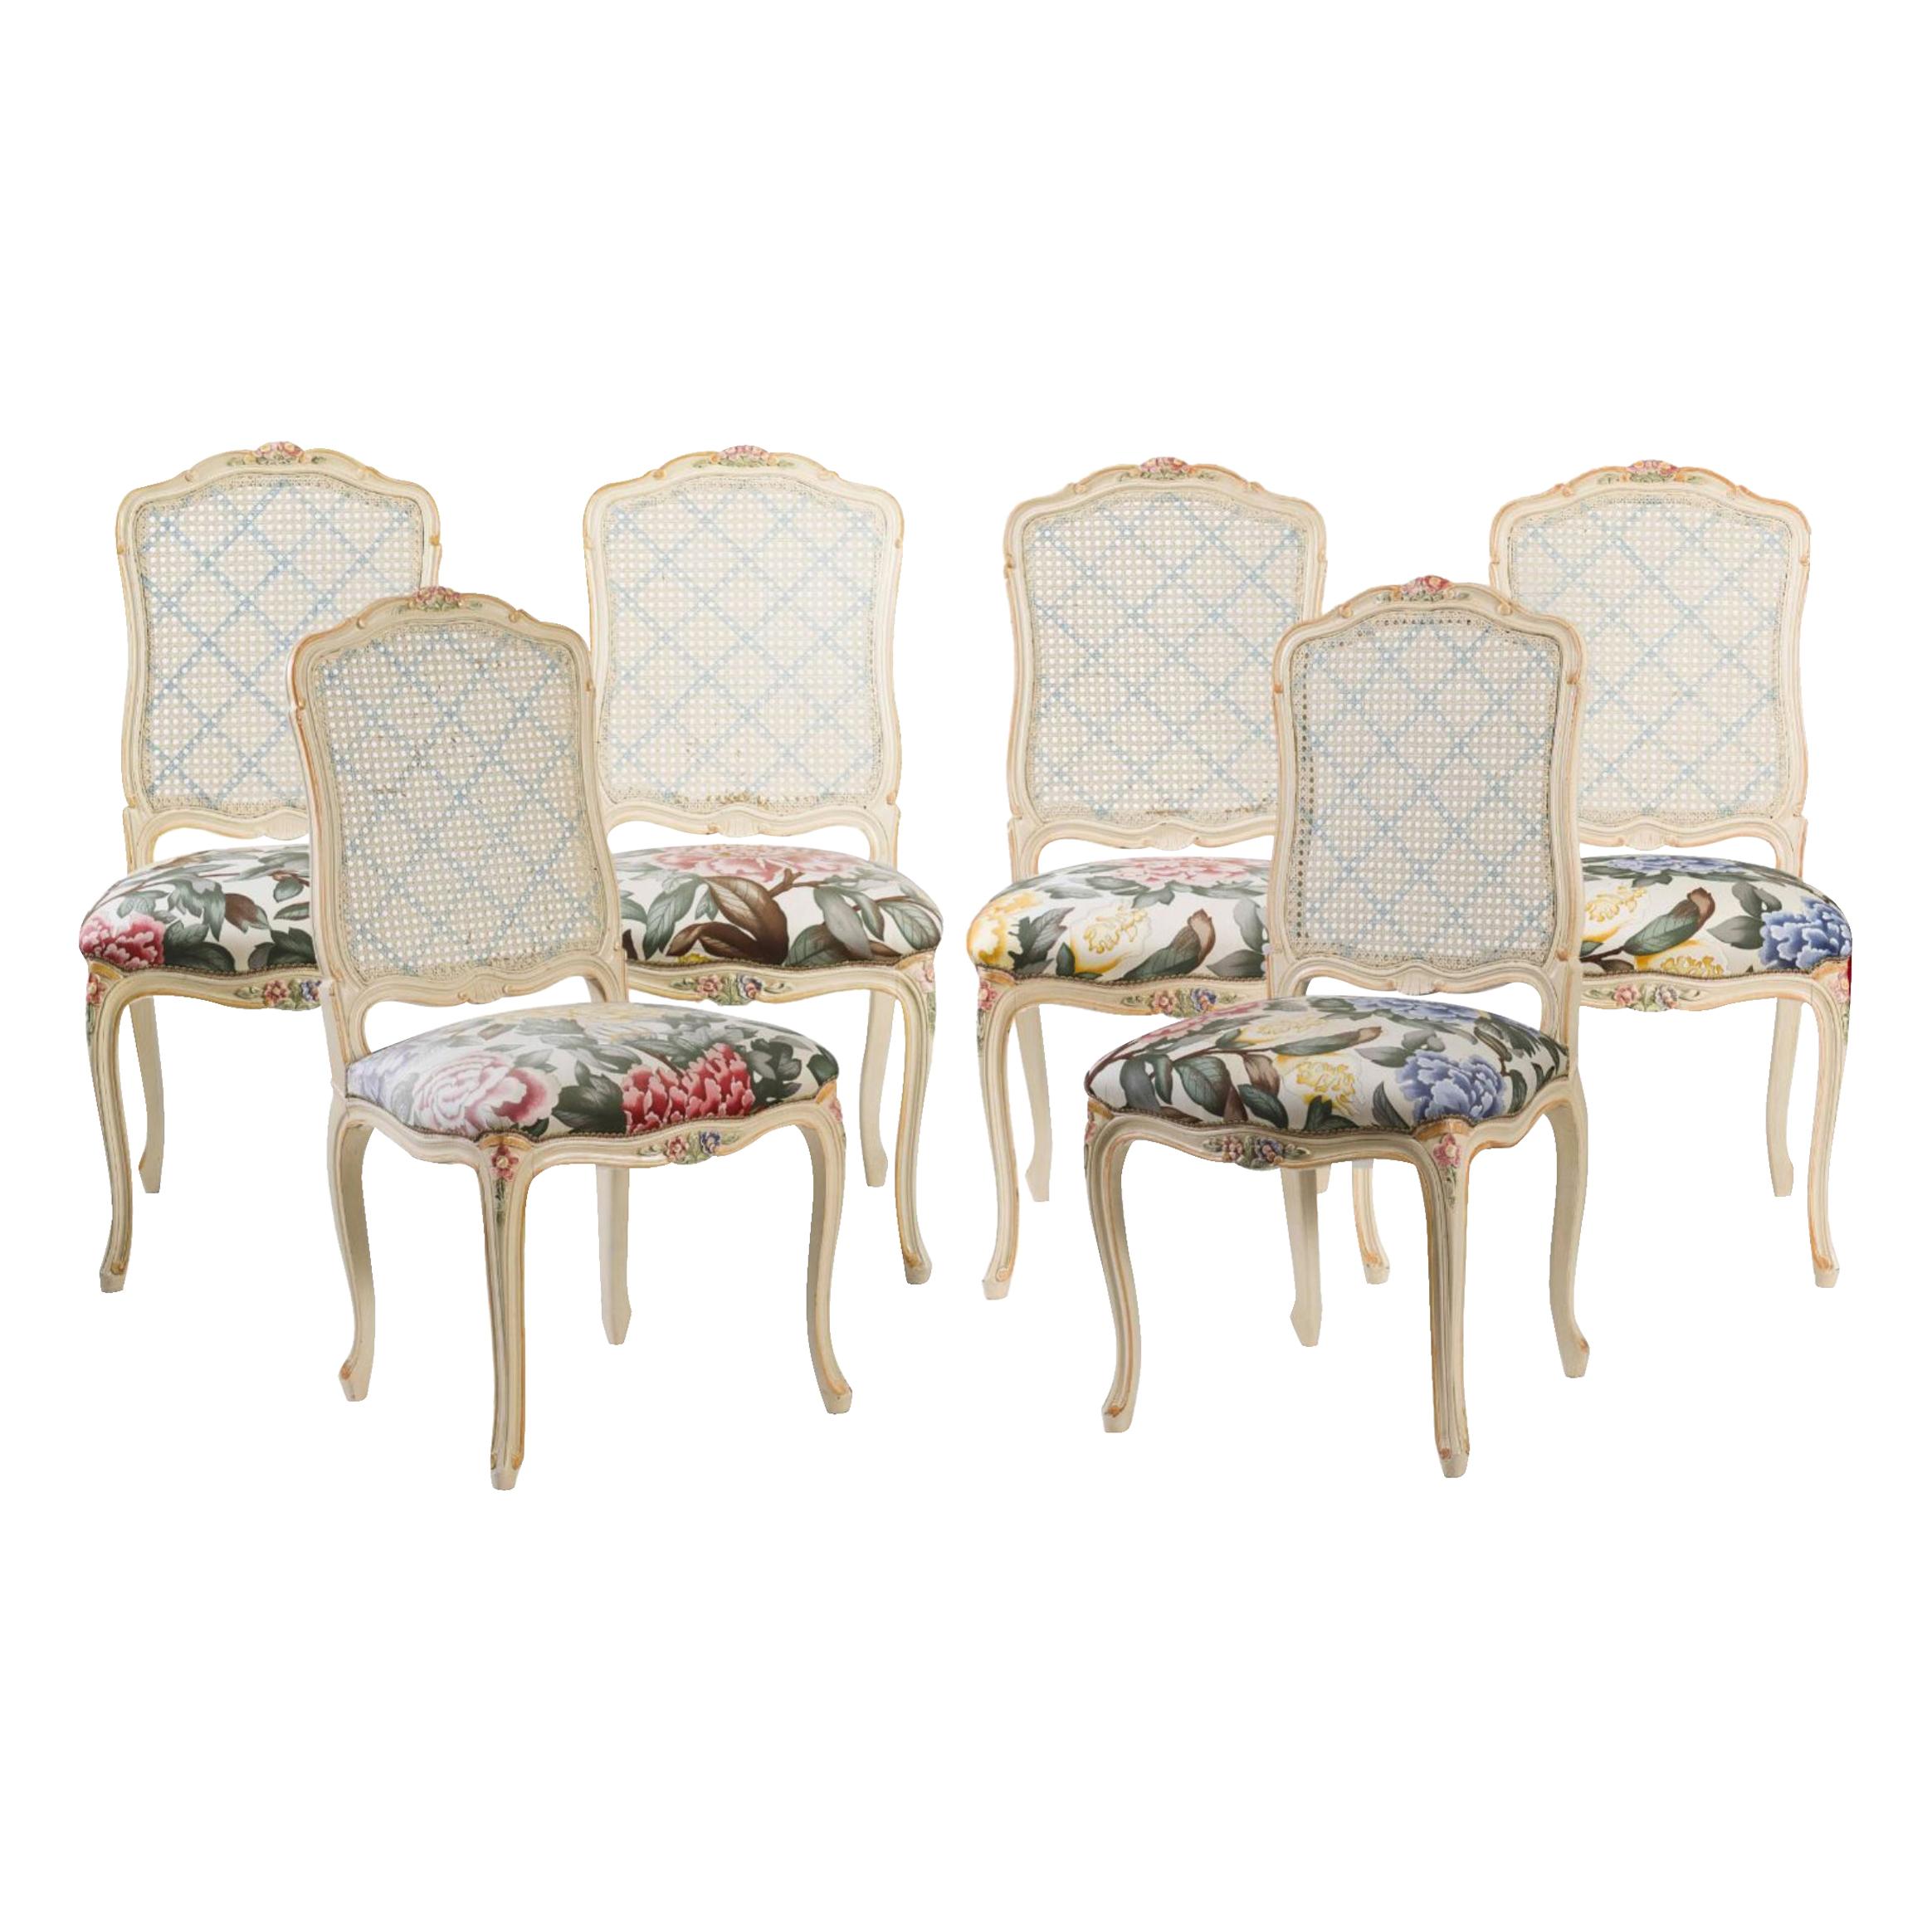 19th Century French Hand Carved and Painted Dining Chairs in Louis XV Style